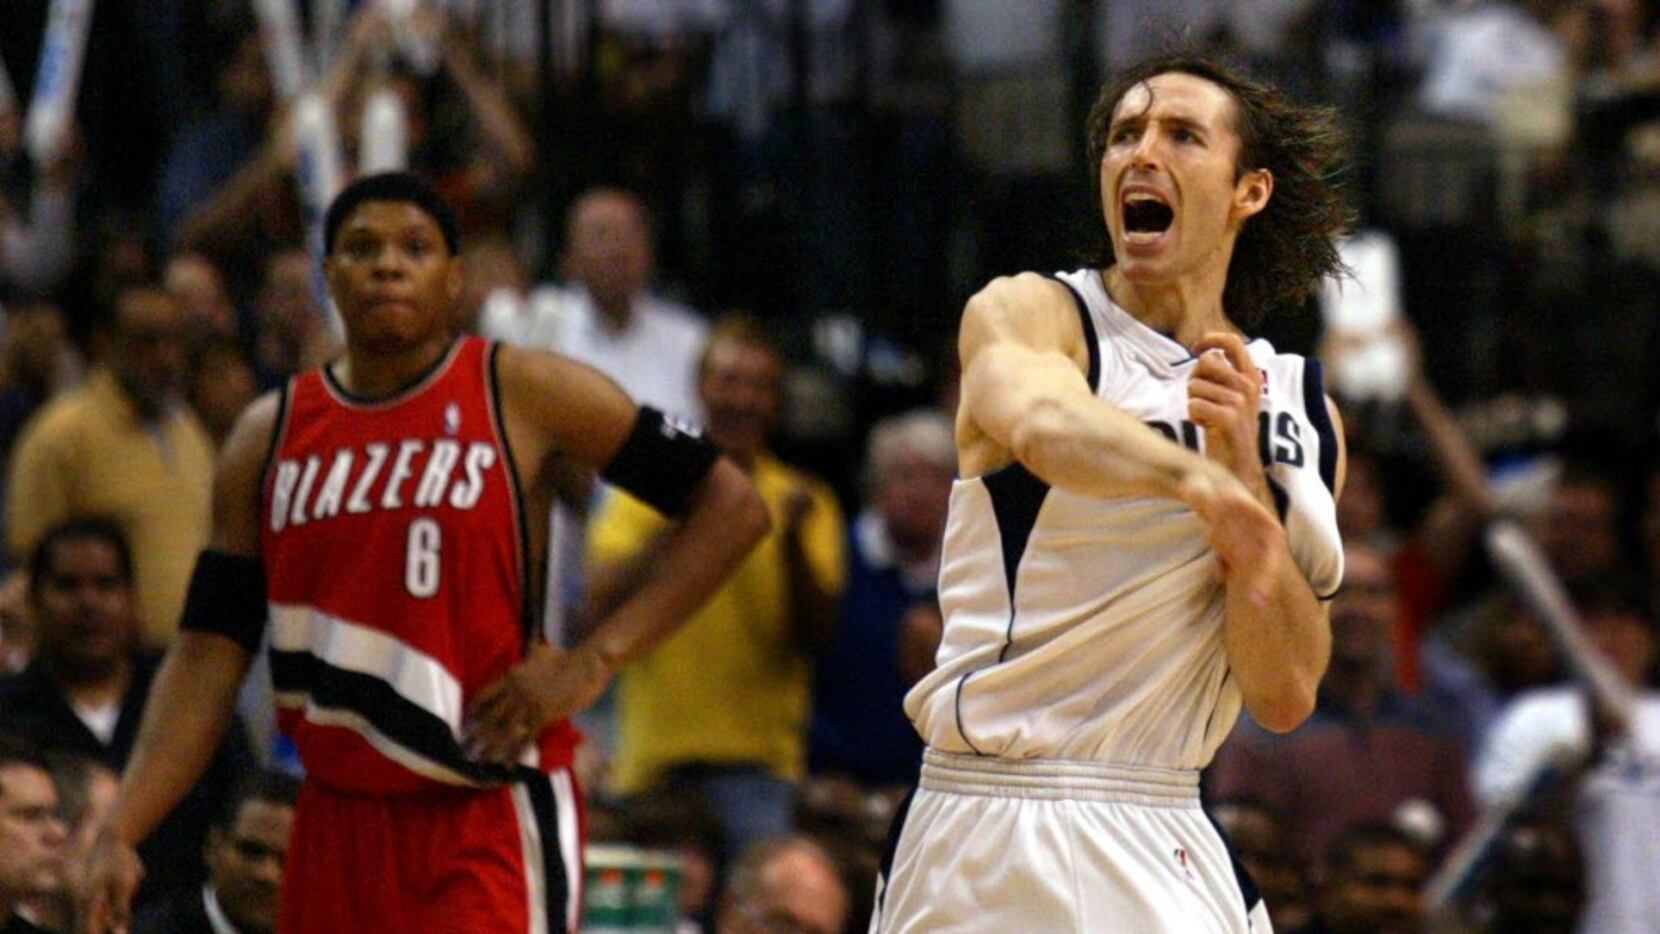 Steve Nash on how to succeed in the NBA makes Final Four prediction